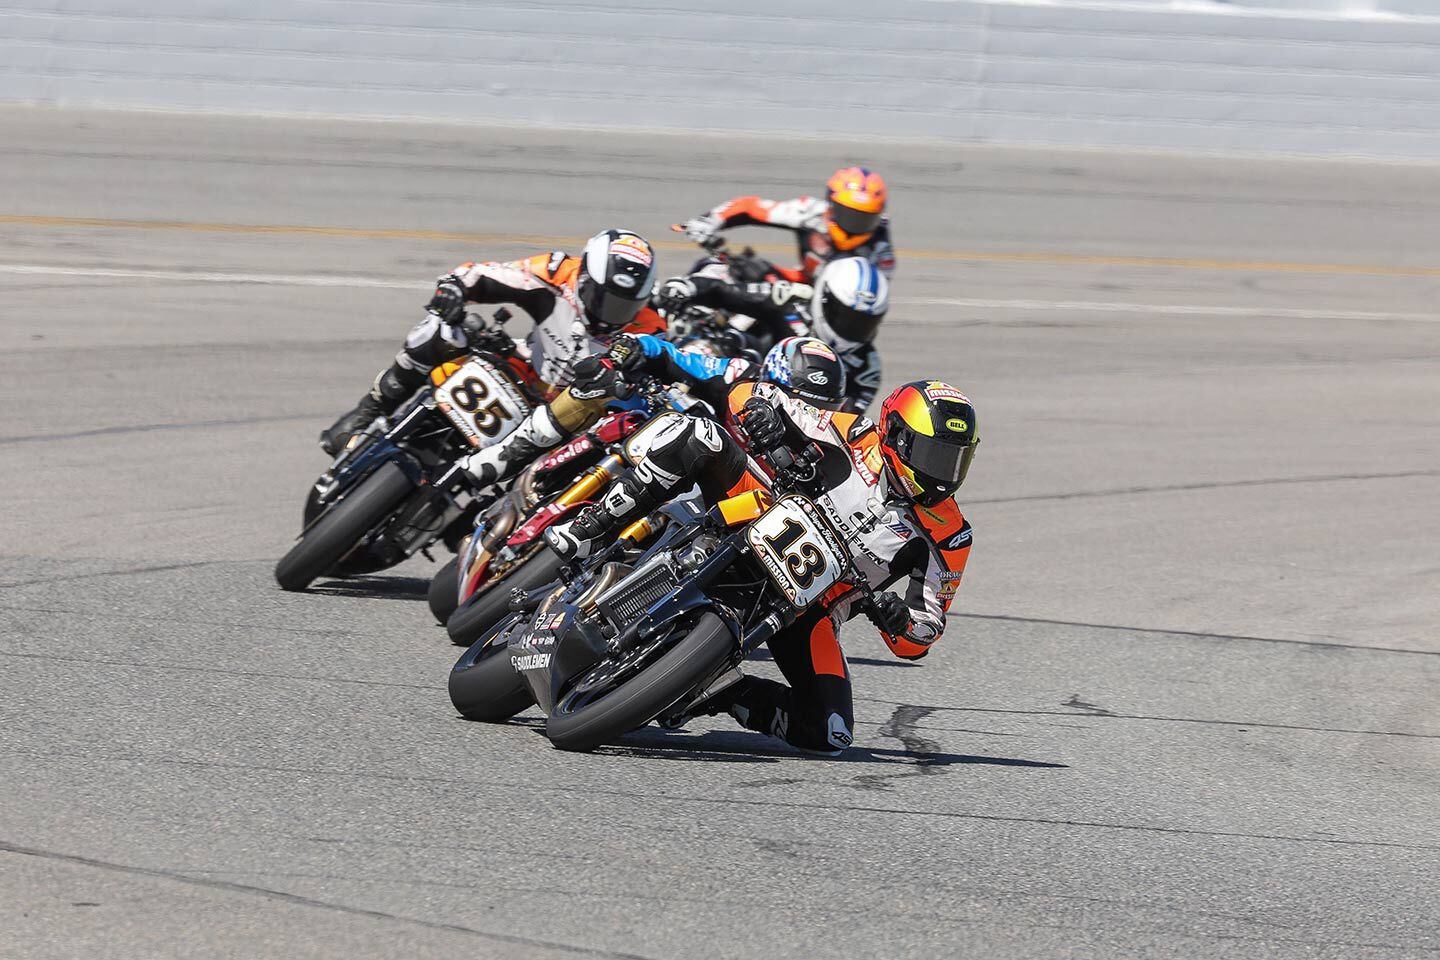 Team Saddlemen rider Cory West rode a race-prepped Harley-Davidson Pan America 1250 Special to victory and topped an all-Harley podium in the second race of the SuperHooligan series at Daytona.